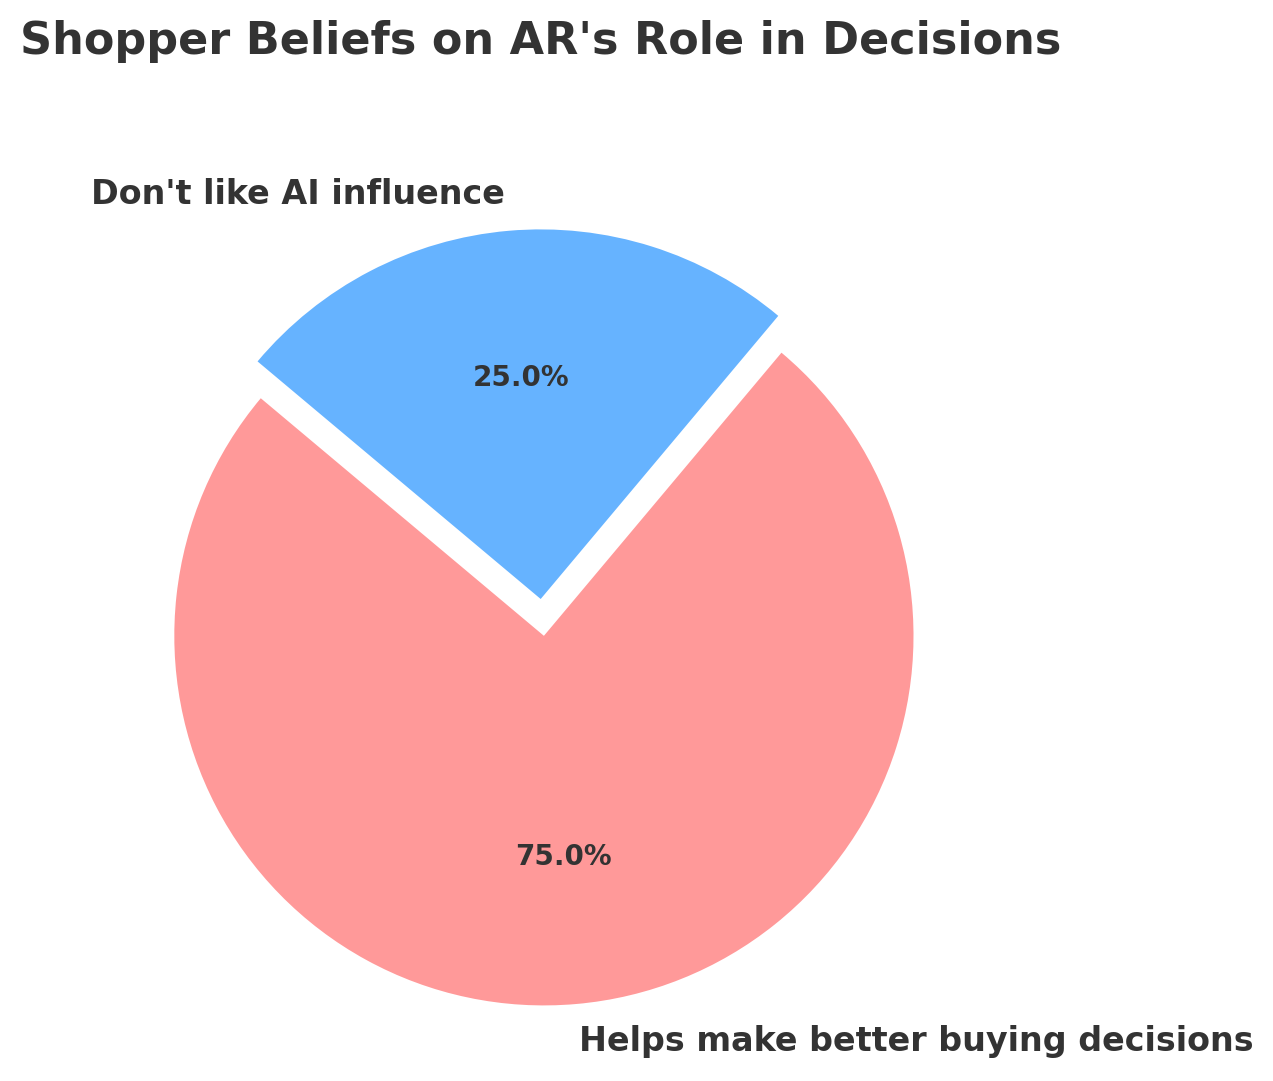 Shopper Beliefs on AR's Role in Decisions